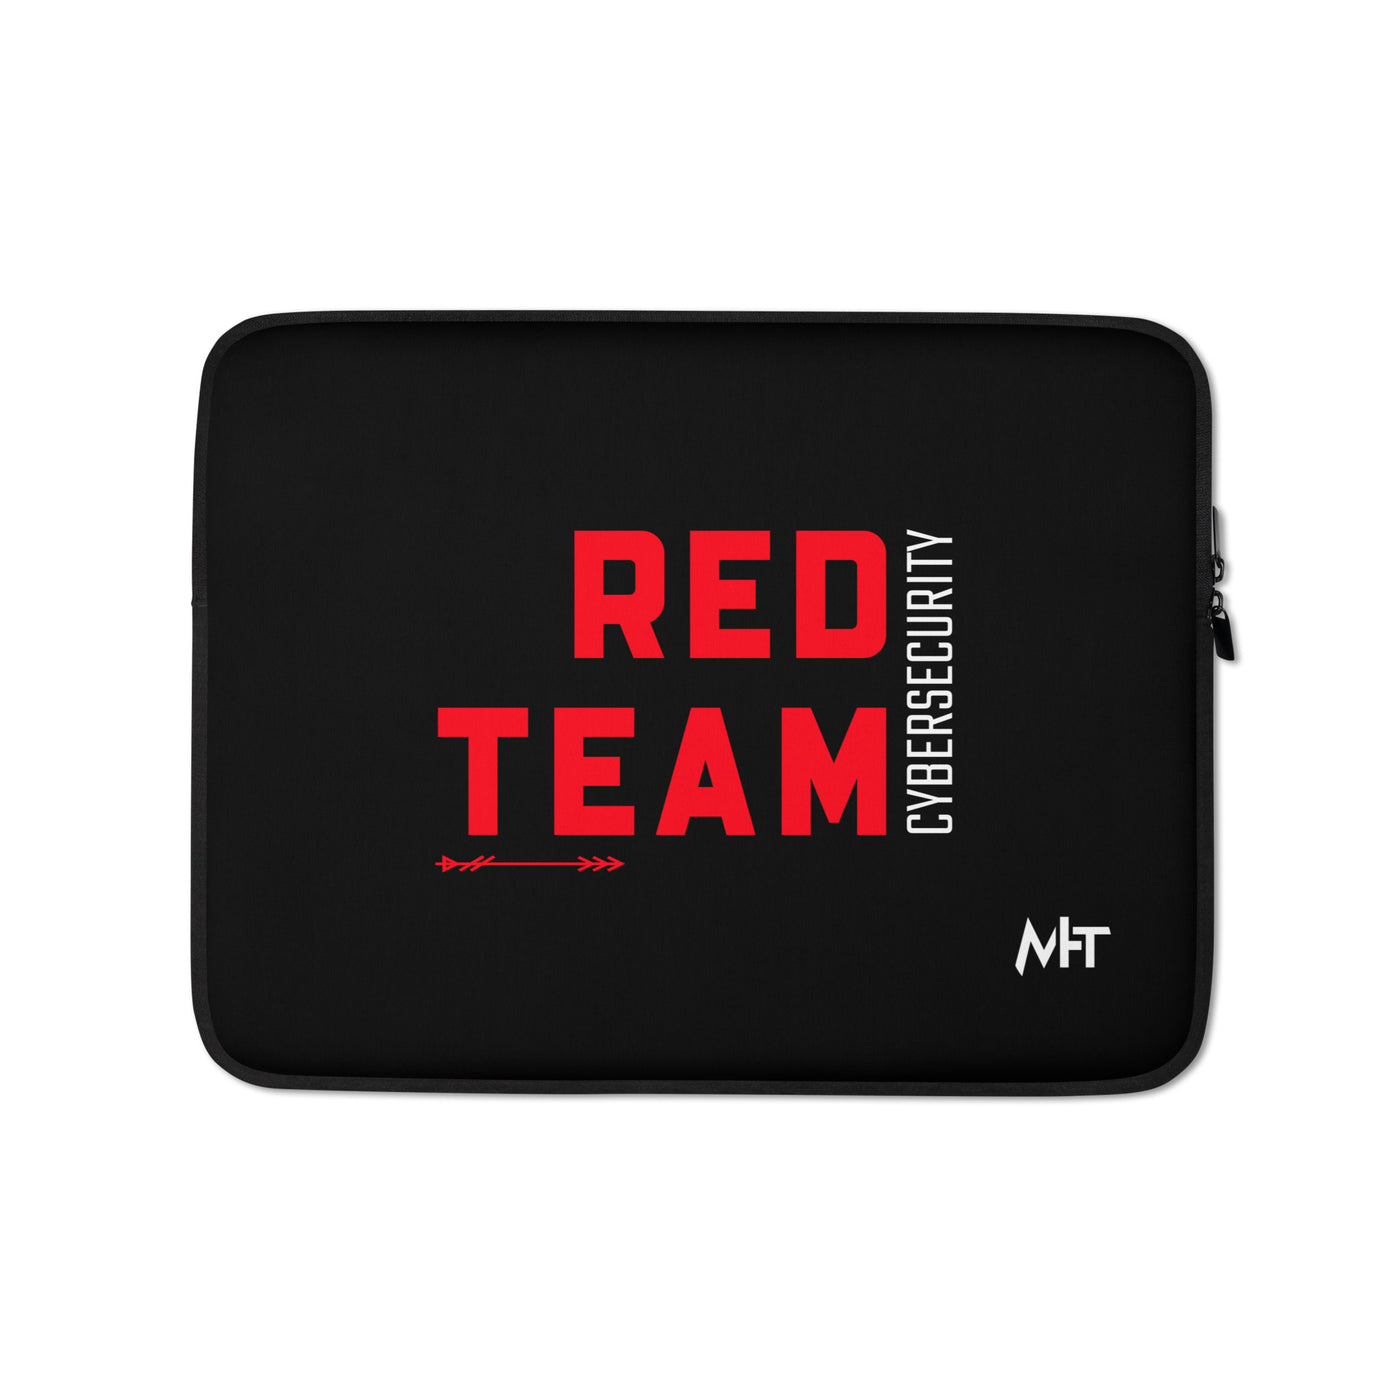 Cyber Security Red Team V8 - Laptop Sleeve